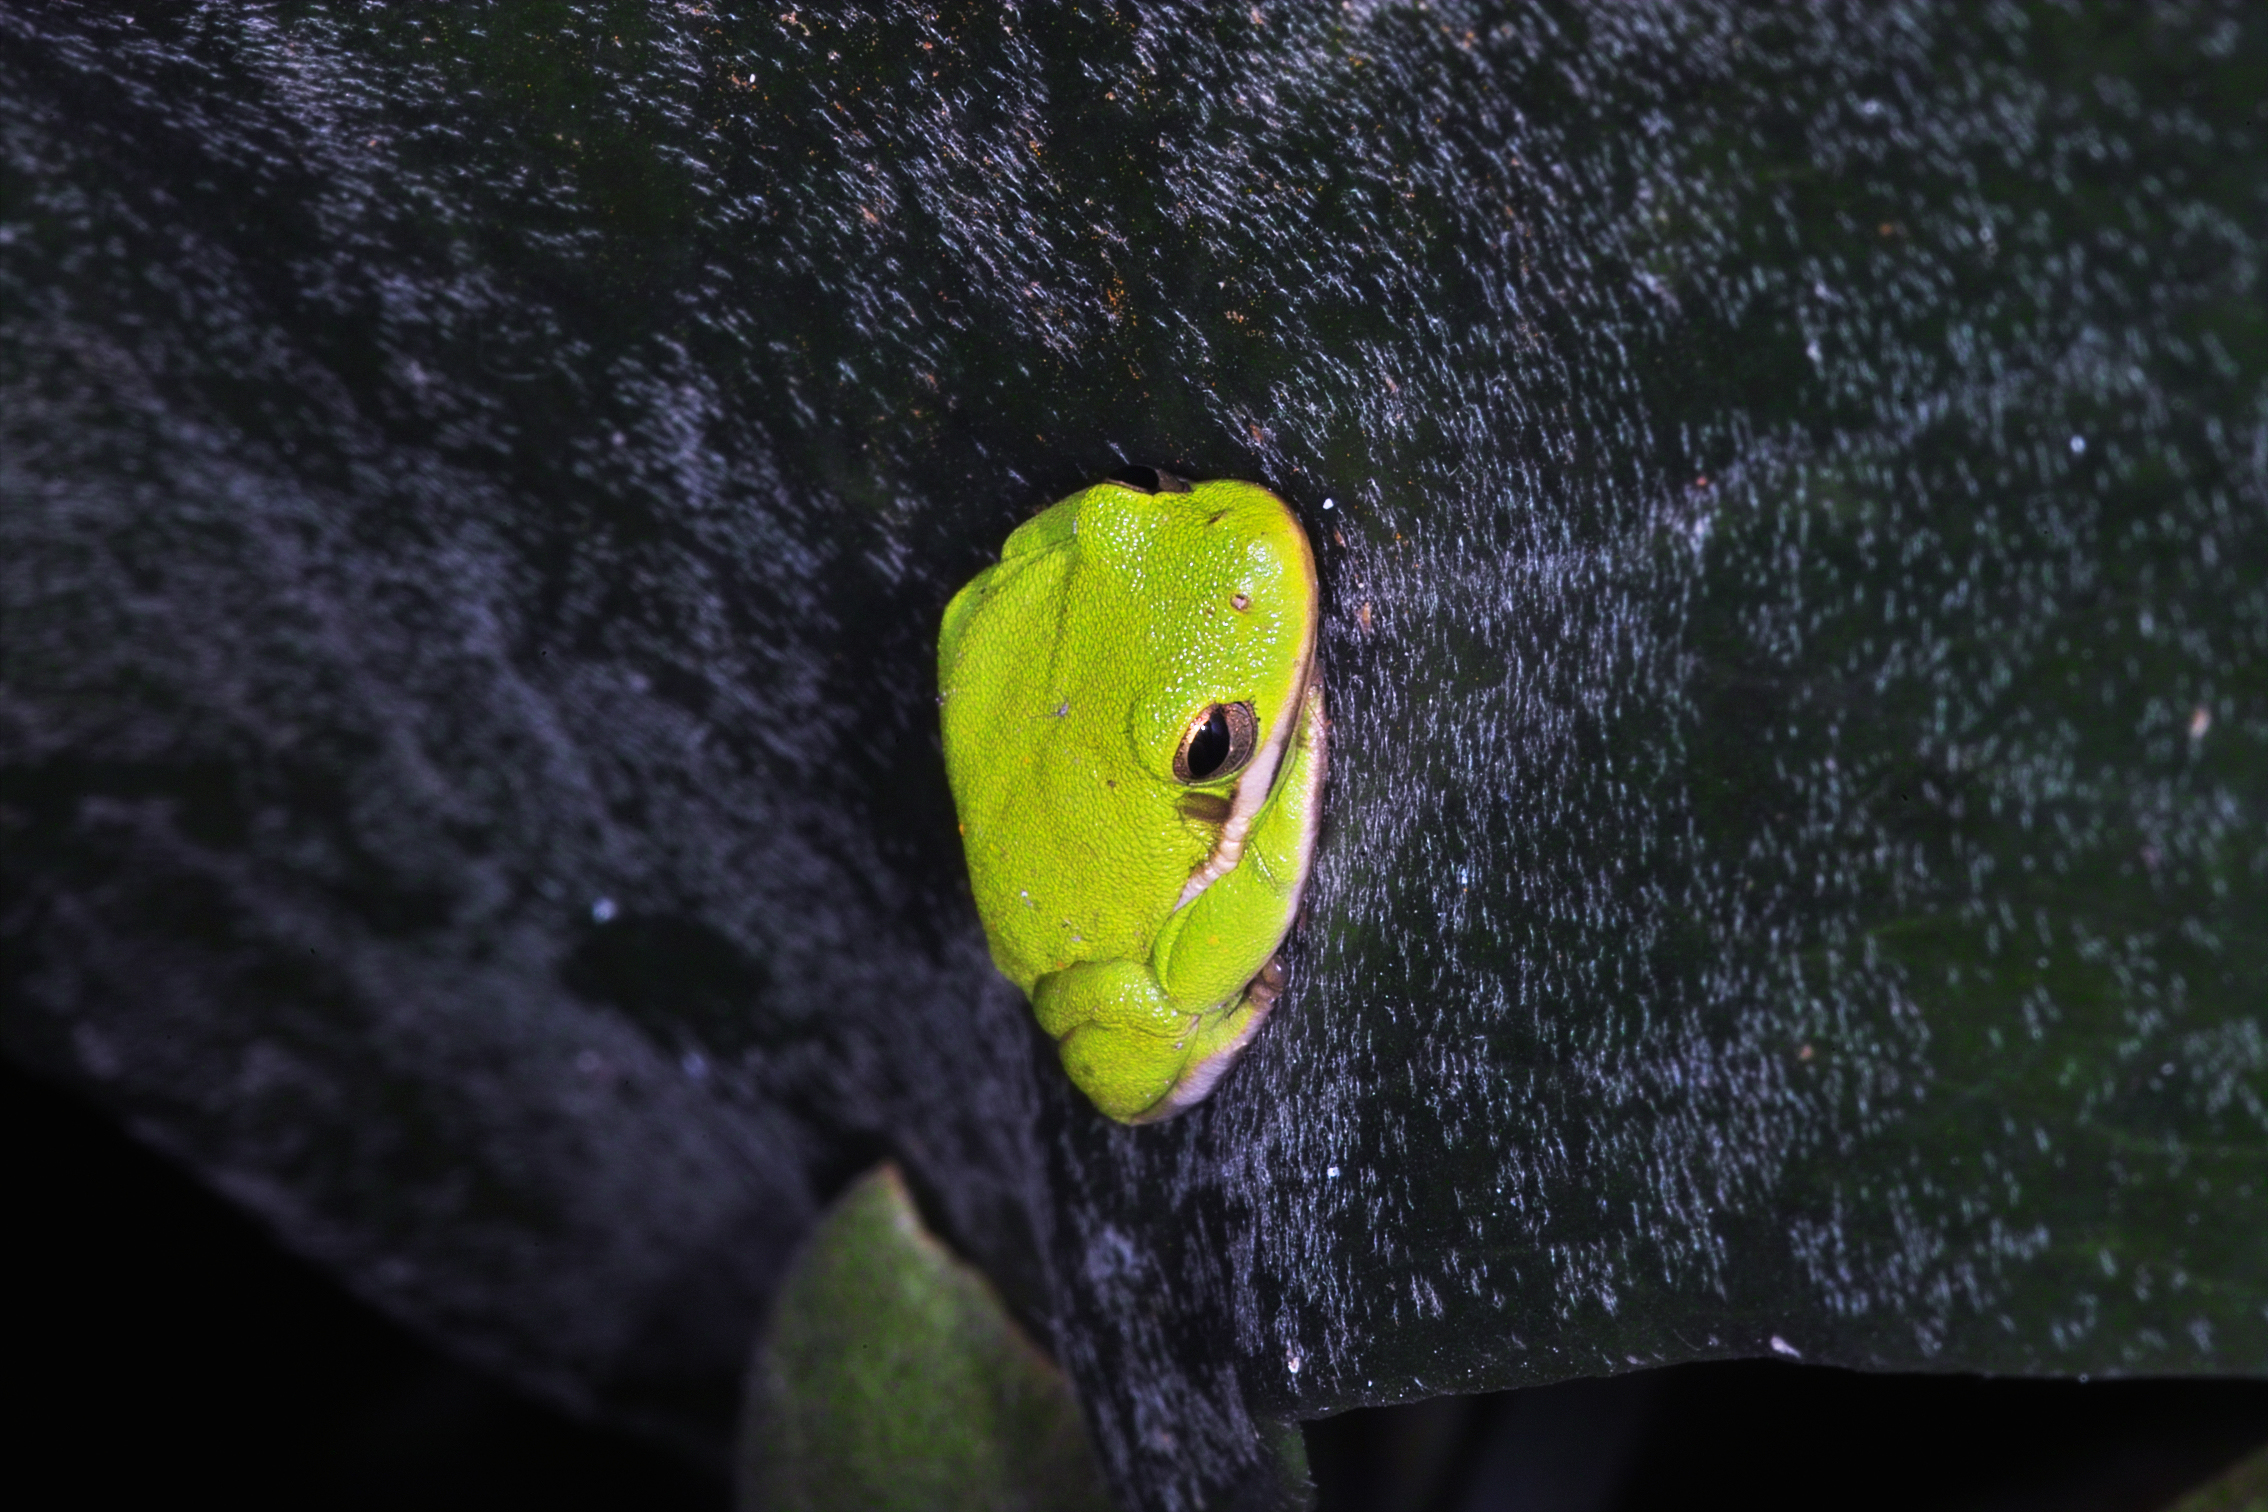 TreeFrog from Front Porch series